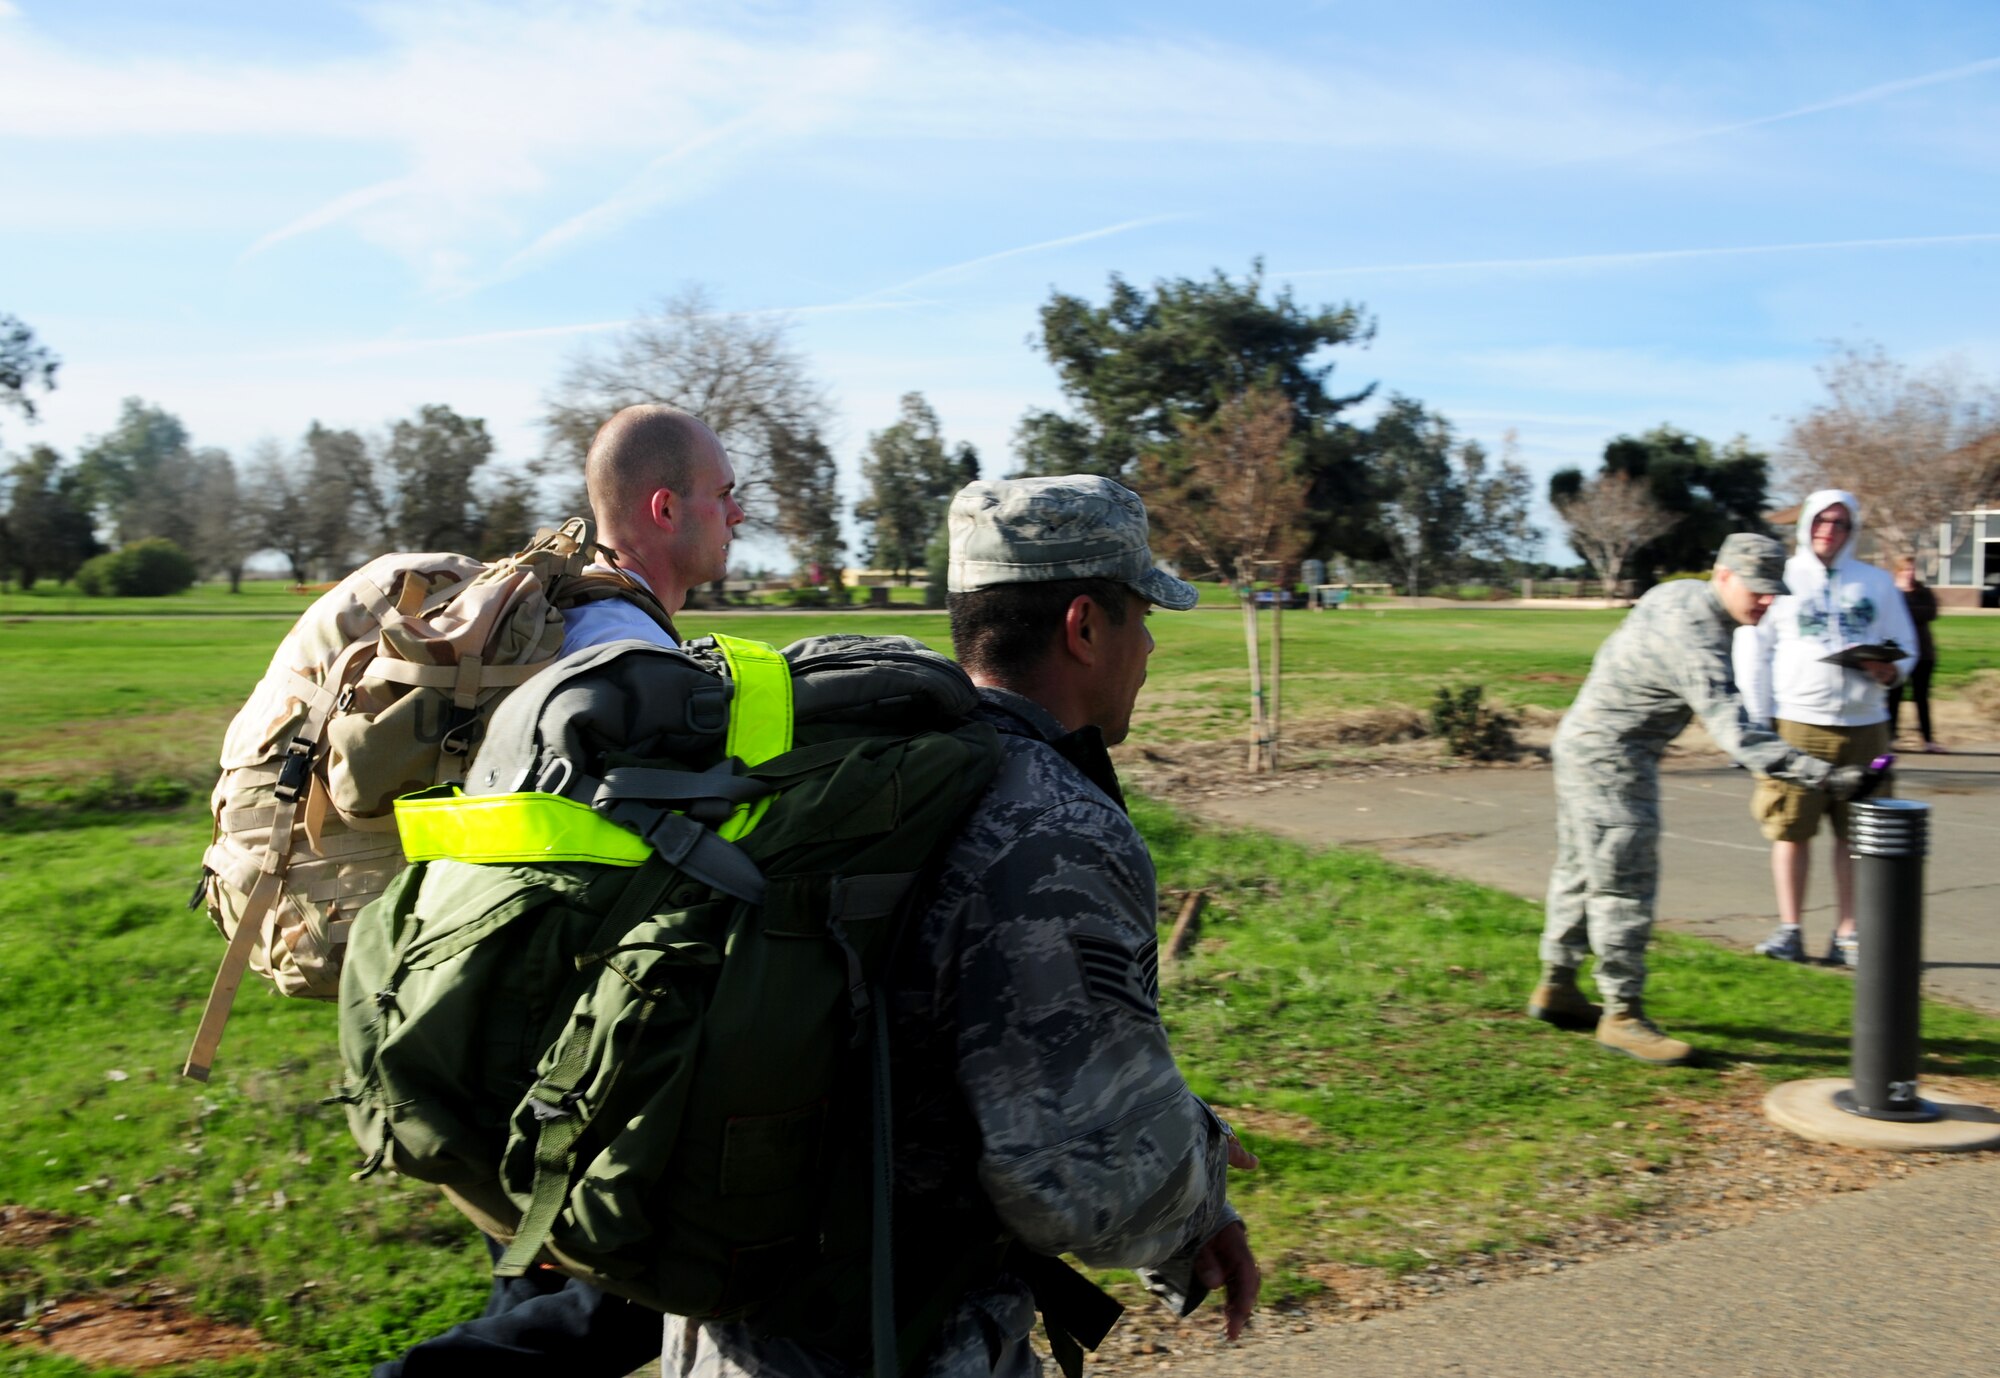 Senior Airman Nick Akley (left), and Staff Sgt. Oscar Vargas, cross the finish line after completing a 10K run with 40-pound rucksacks at Beale Air Force Base, Calif., Feb. 20, 2014. (U.S. Air Force photo by Airman 1st Class Bobby Cummings/Released)